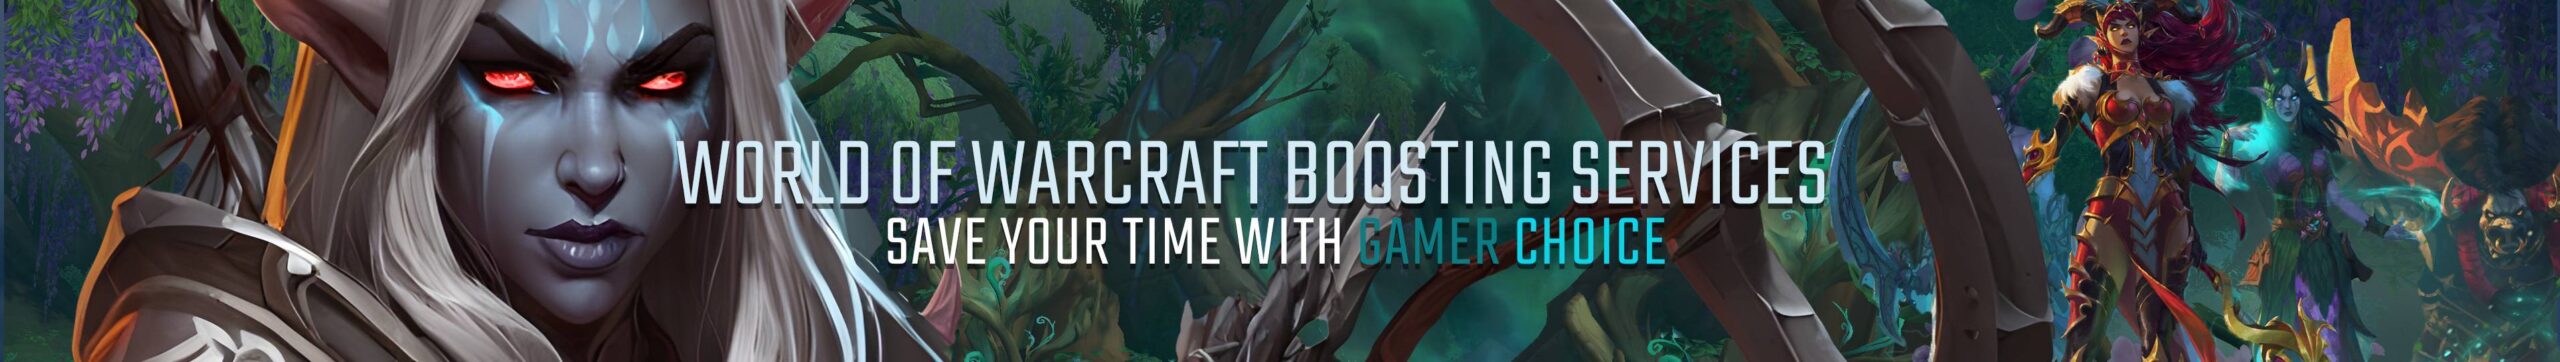 World of Warcraft Boost Services